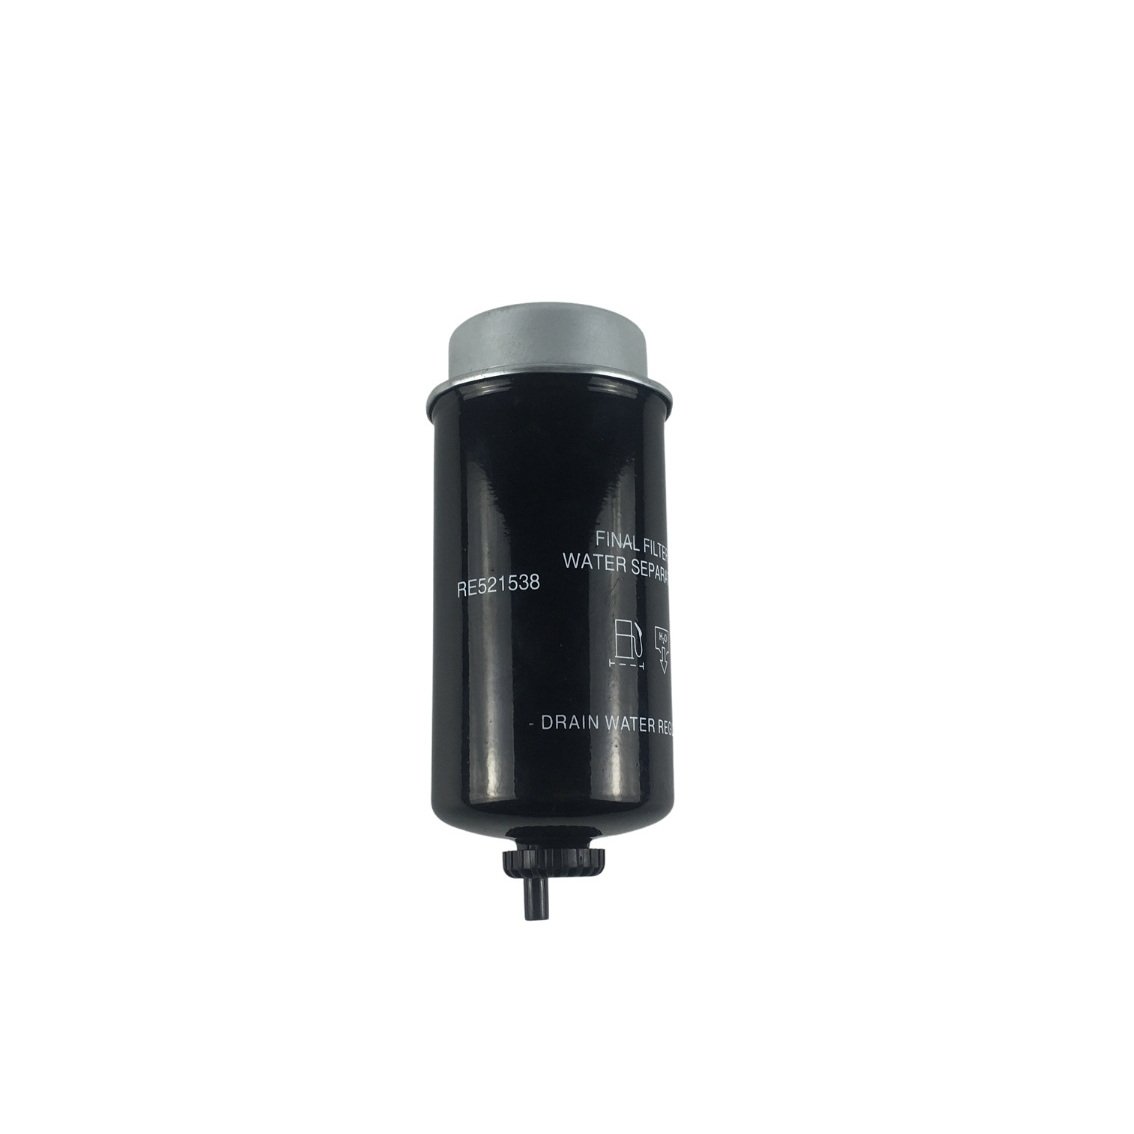 Fuel Filter Reference: S RE521538 FIL Suitable For Agricultural Machinery